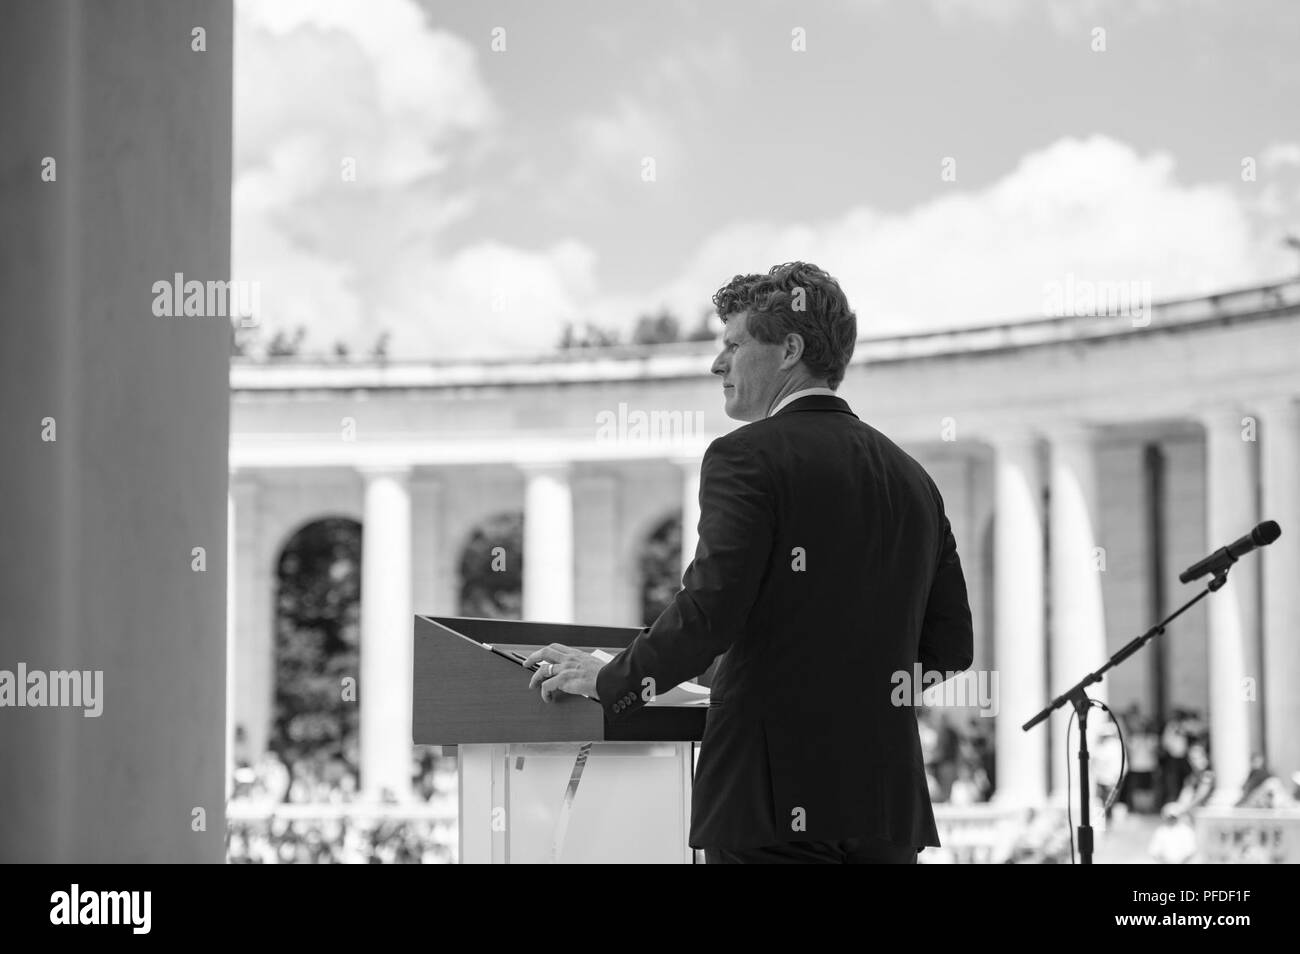 U.S. Rep. Joe Kennedy III speaks during a ceremony celebrating the life of his grandfather, Sen. Robert F. Kennedy, on the 50th anniversary of Sen. Kennedy's assassination, in the Memorial Amphitheater at Arlington National Cemetery, Arlington, Virginia, June 6, 2018. The ceremony was open to the public and attended by former President Bill Clinton, Ethel Kennedy, Kathleen Kennedy Townsend, and U.S. Rep. John Lewis, among others. Stock Photo